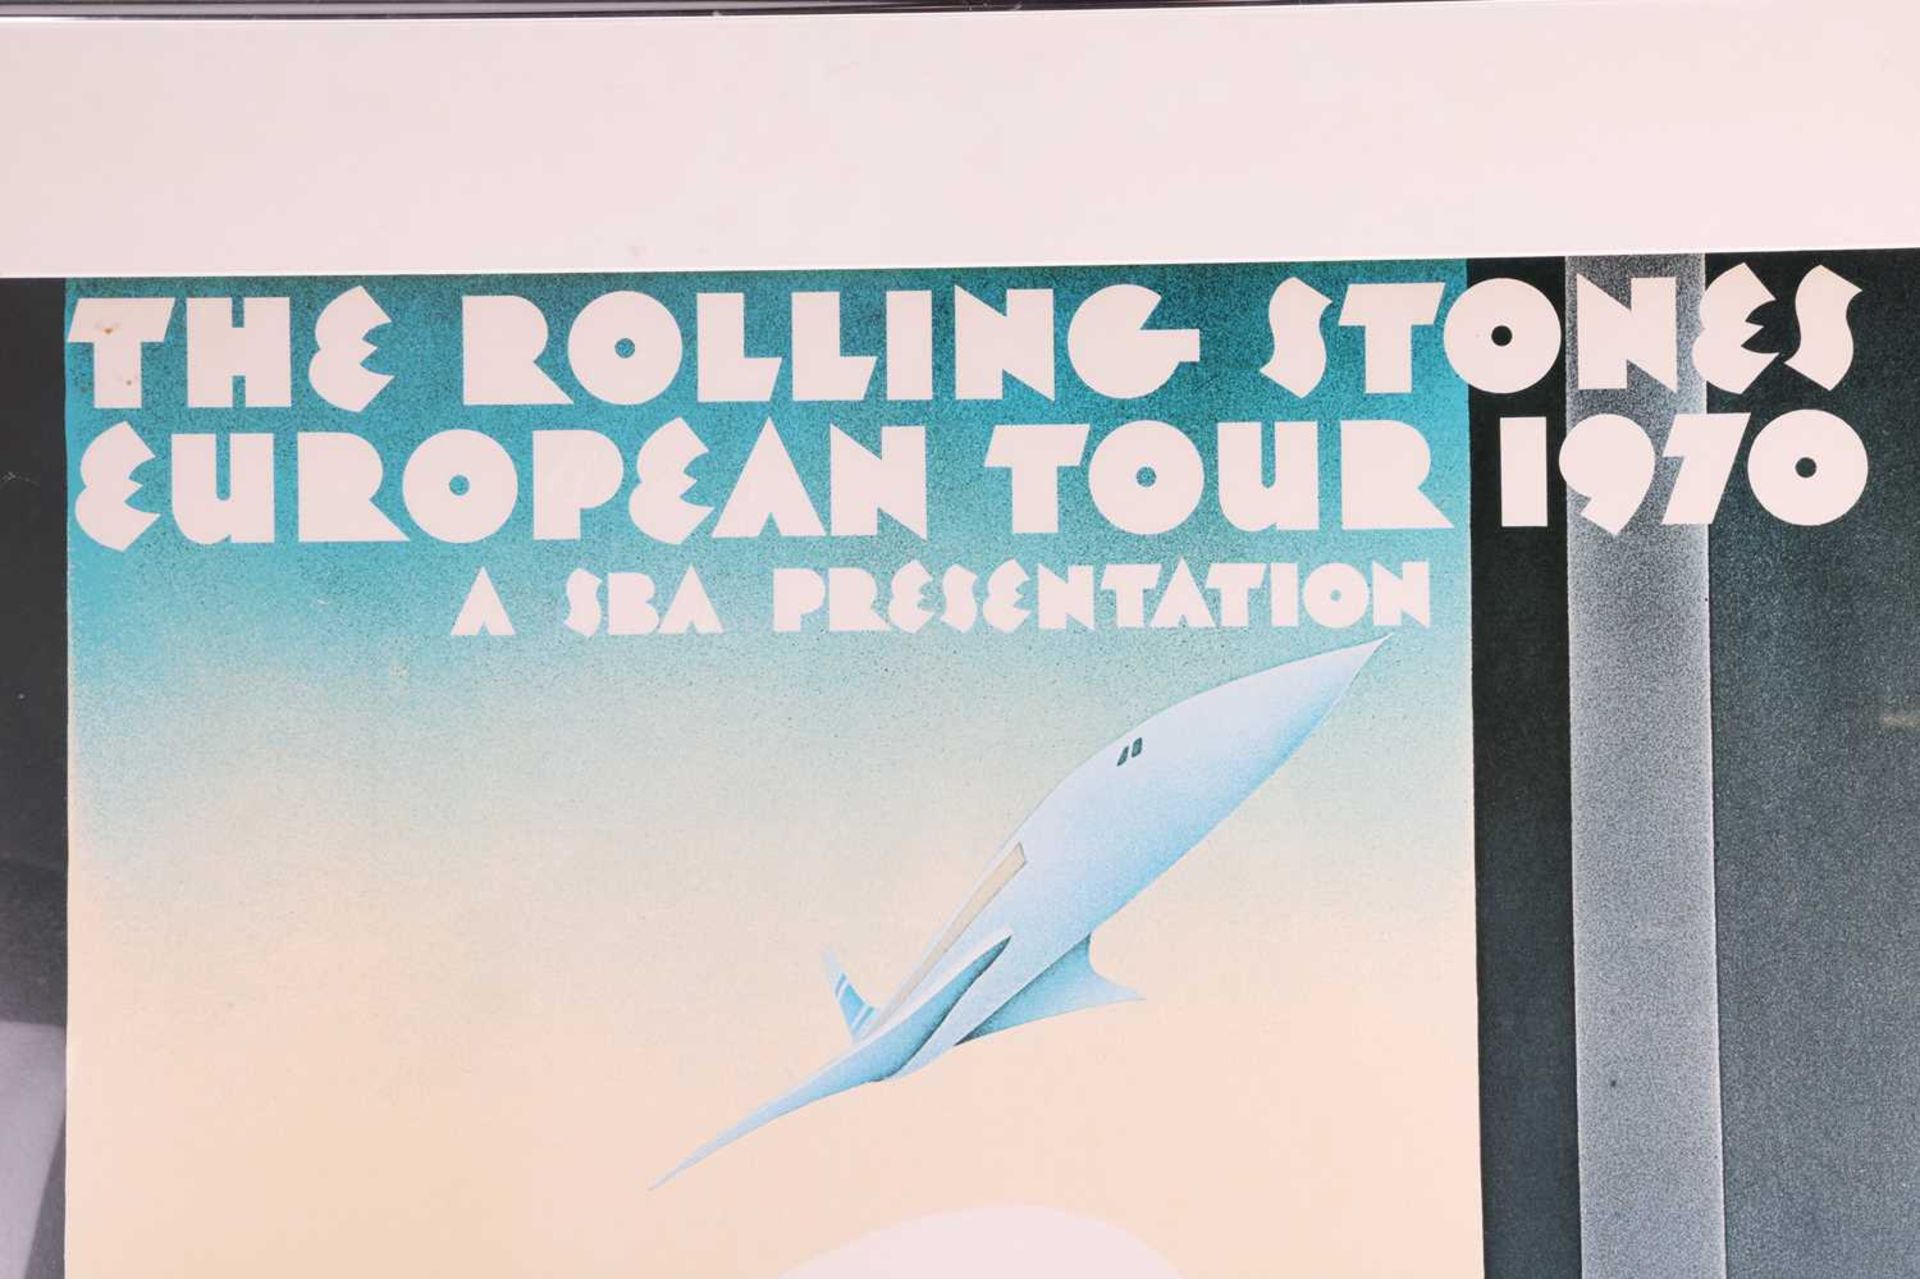 The Rolling Stones: a European Tour poster, 1970, designed by John Pasche, framed and glazed, the fr - Bild 8 aus 9